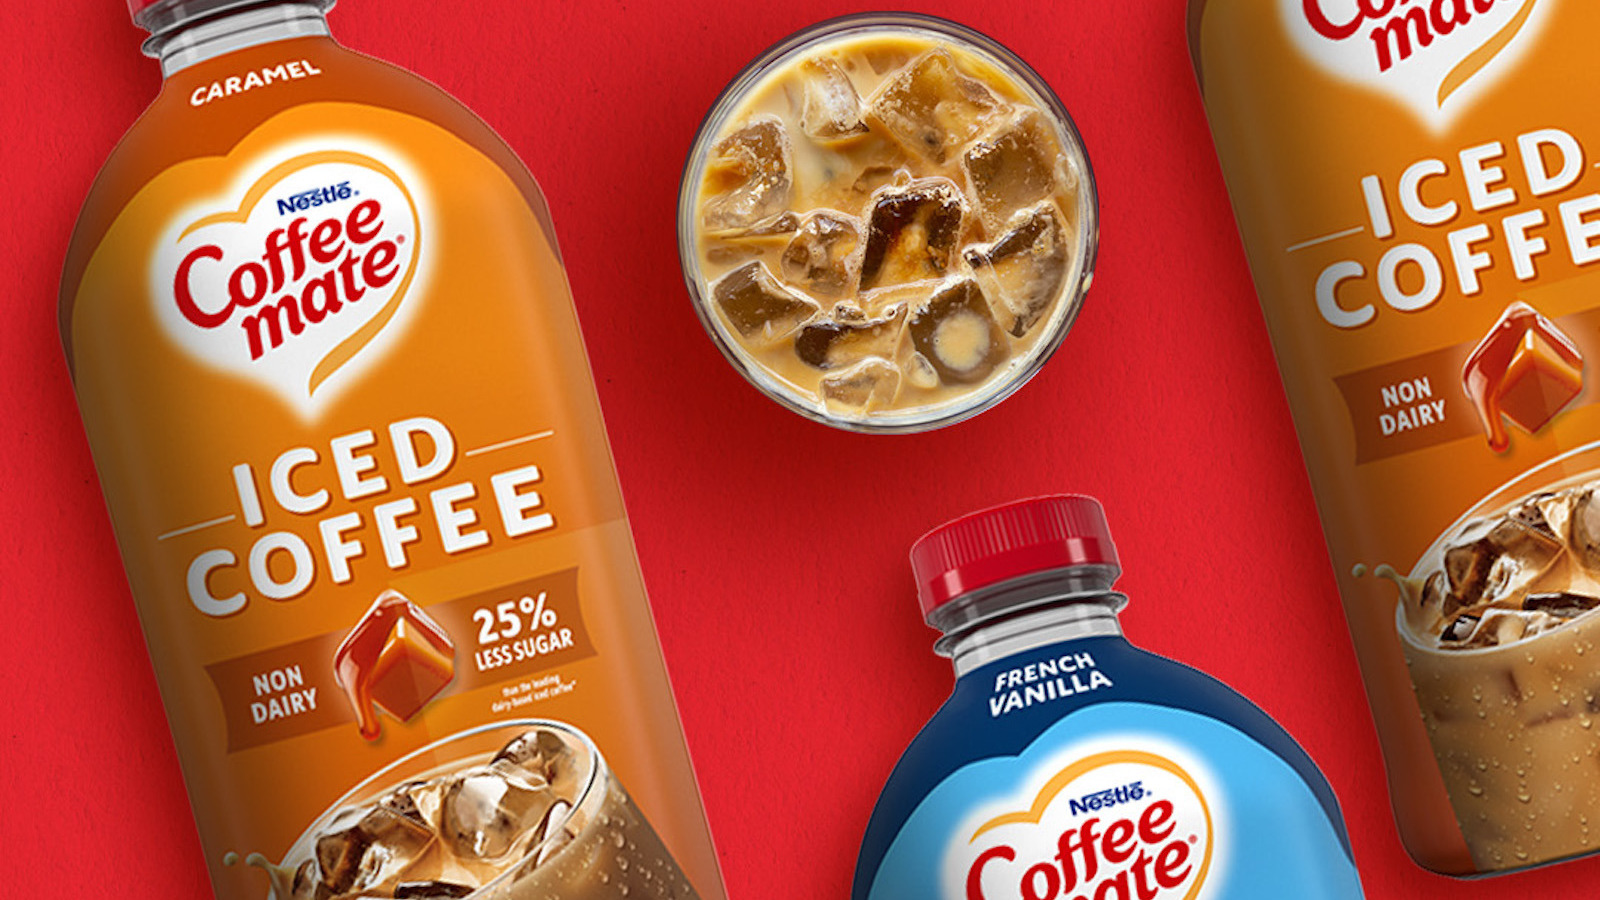 Coffee Mate Releases Non-Dairy Ready-To-Drink Iced Coffee Bottles